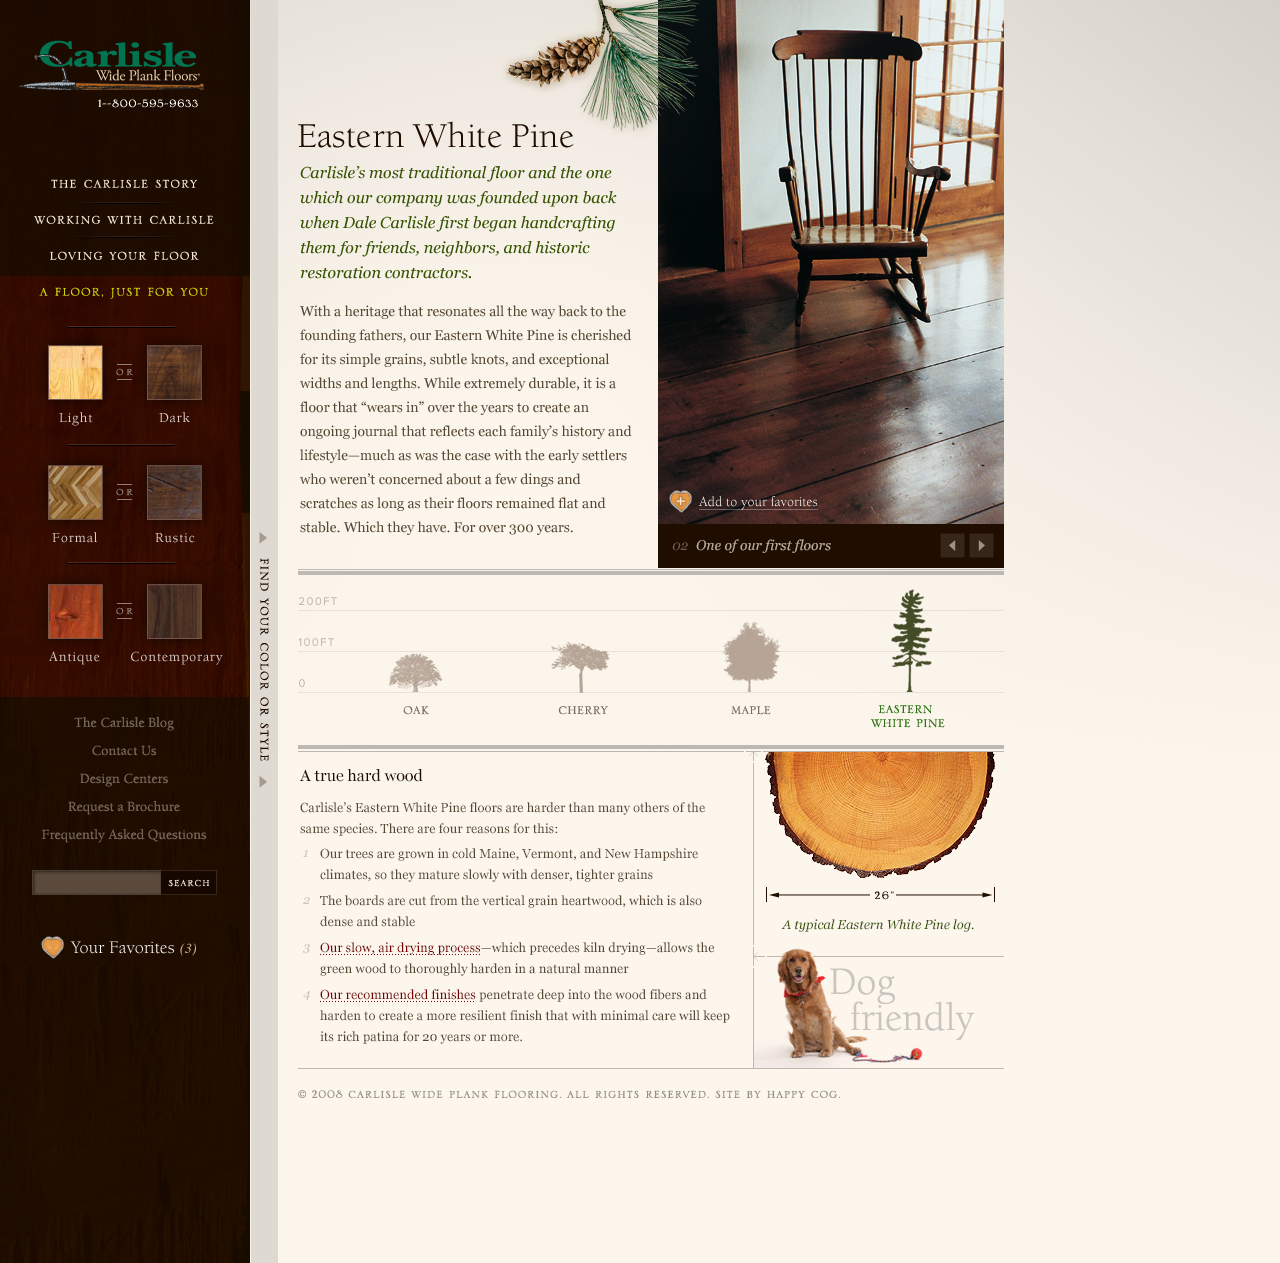 Web design concept for an interior page of the Carlisle Wide Plank Floors website